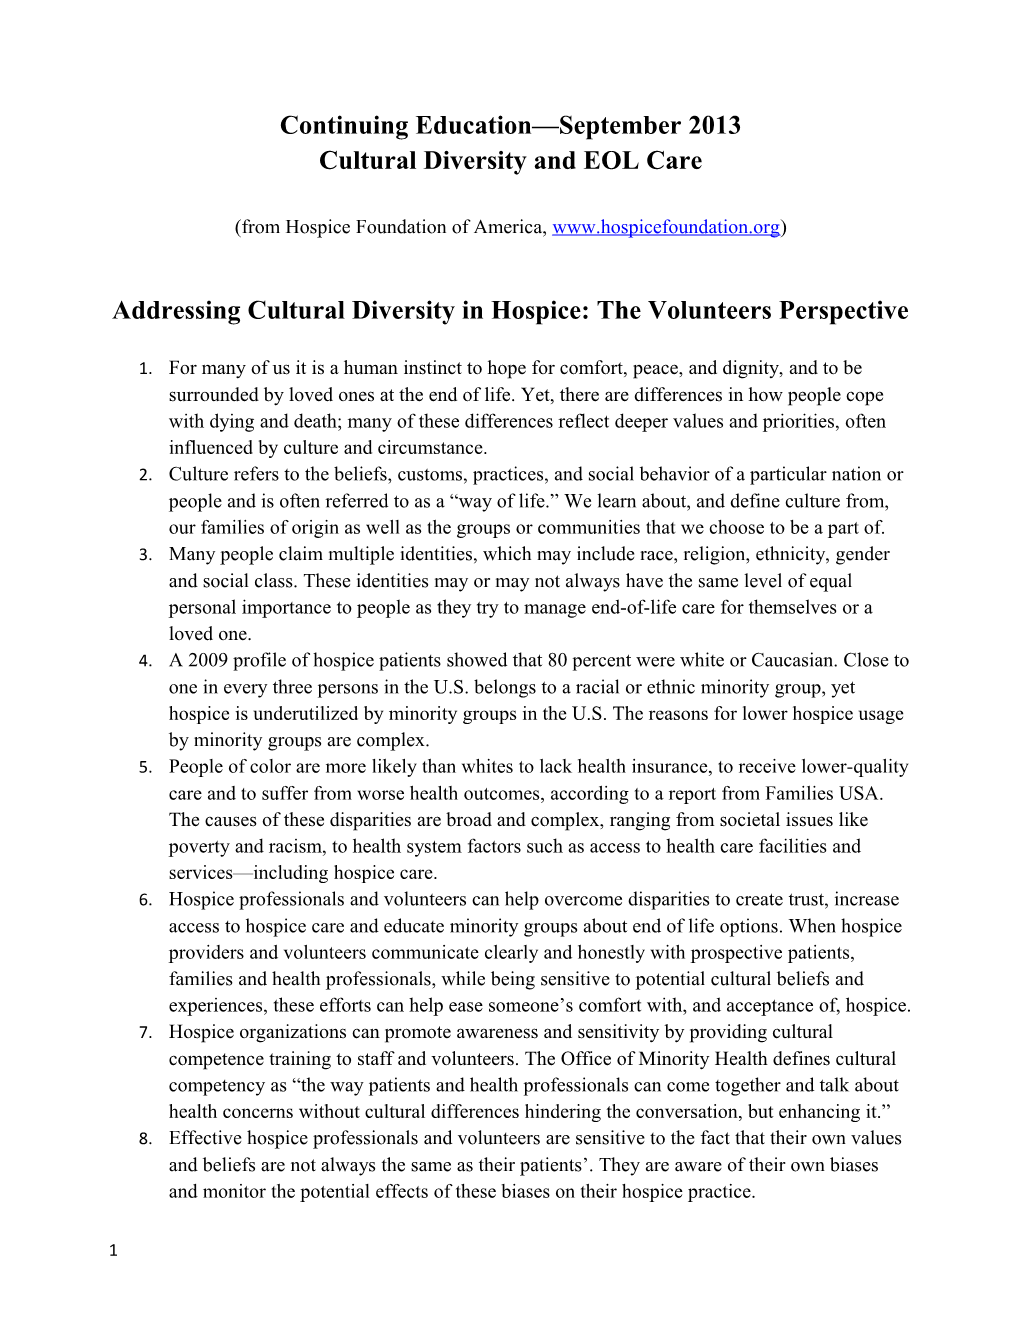 Cultural Diversity and EOL Care